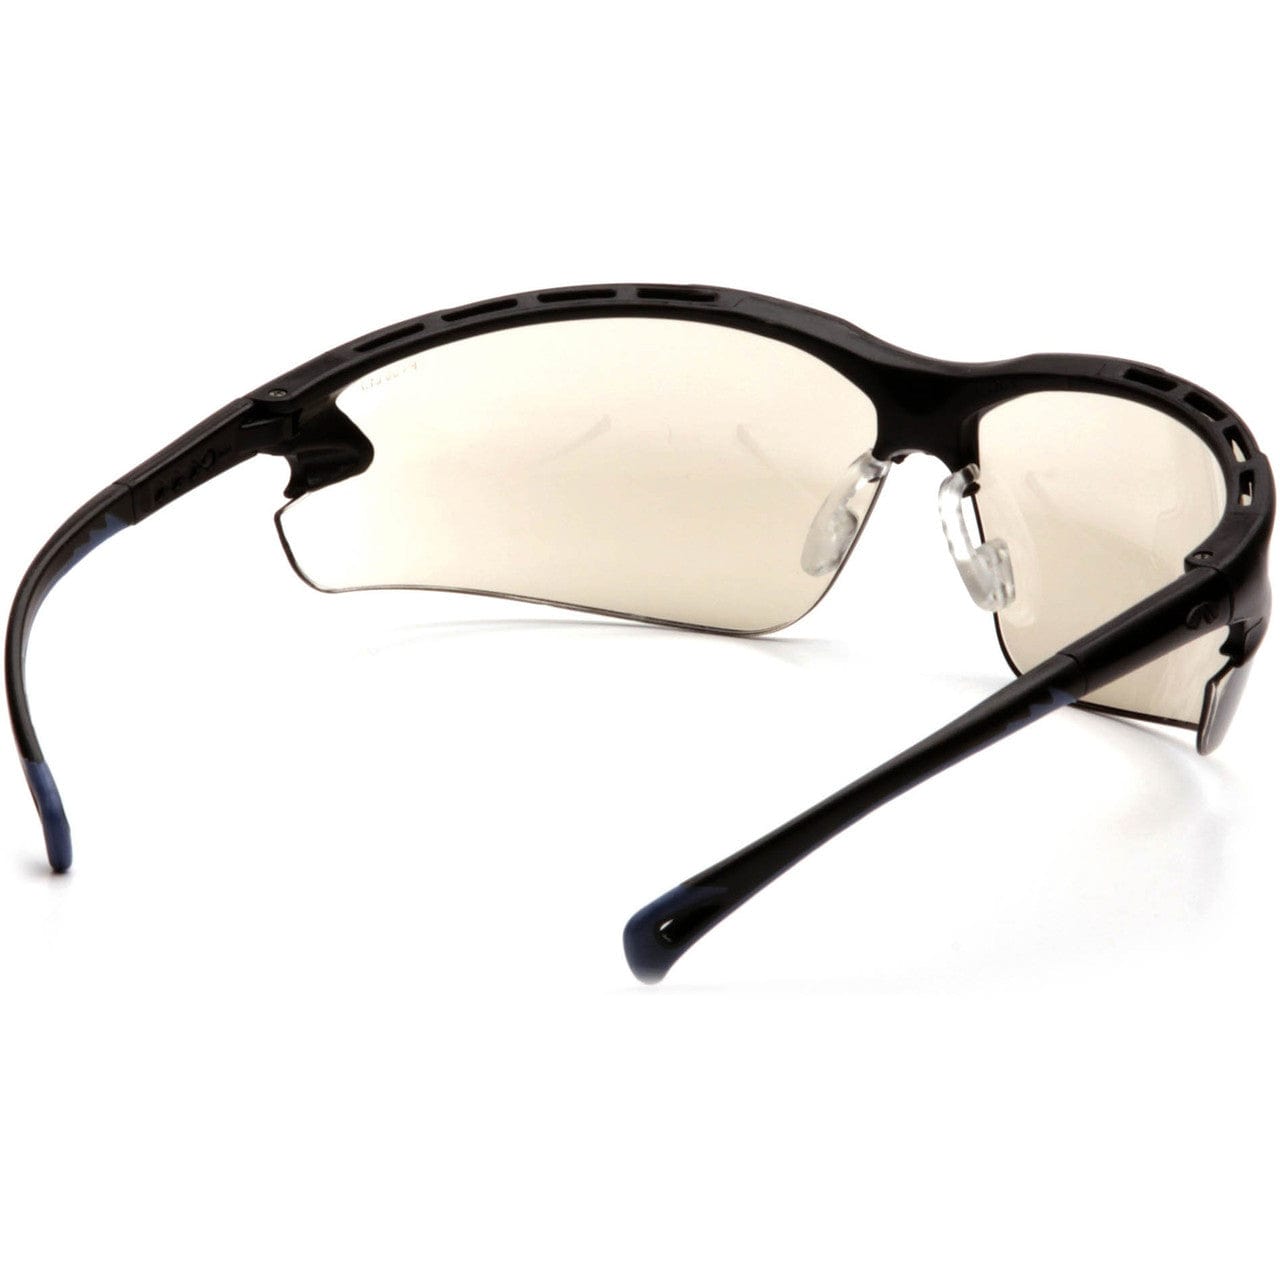 Pyramex Venture 3 Safety Glasses with Black Frame and Indoor/Outdoor Lens SB5780D Inside View